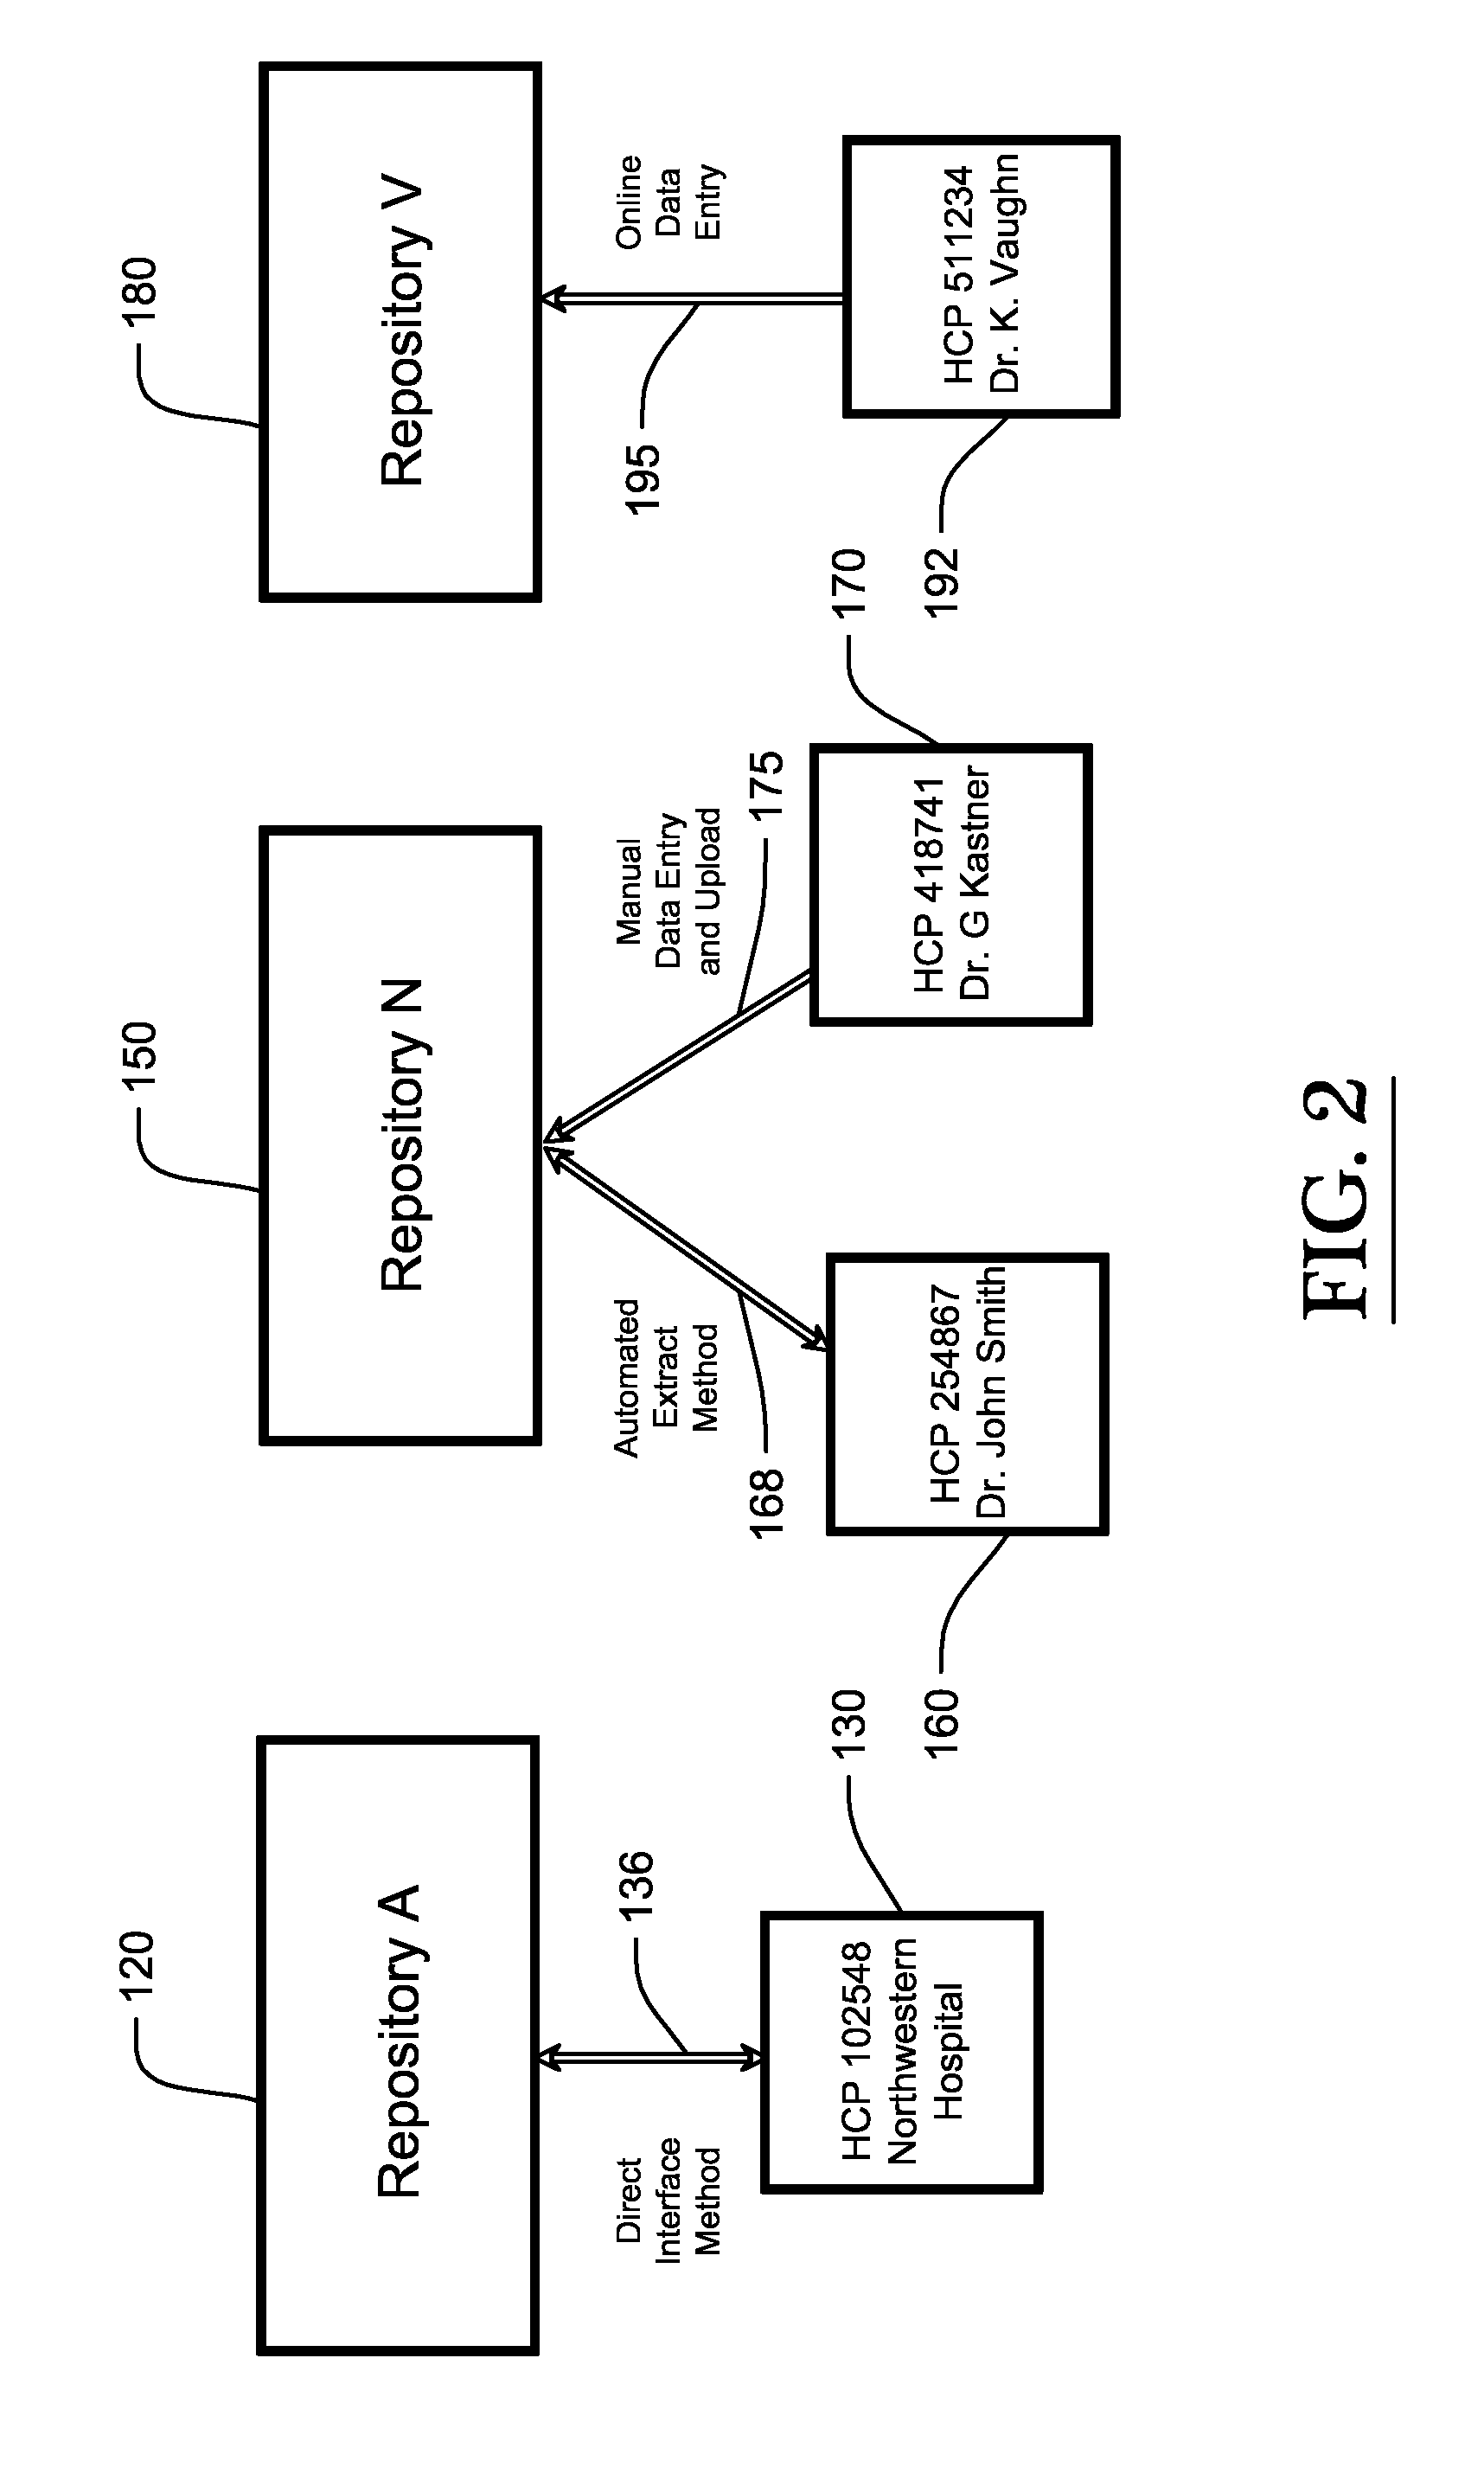 Gathering, storing, and retrieving summary electronic healthcare record information from healthcare providers